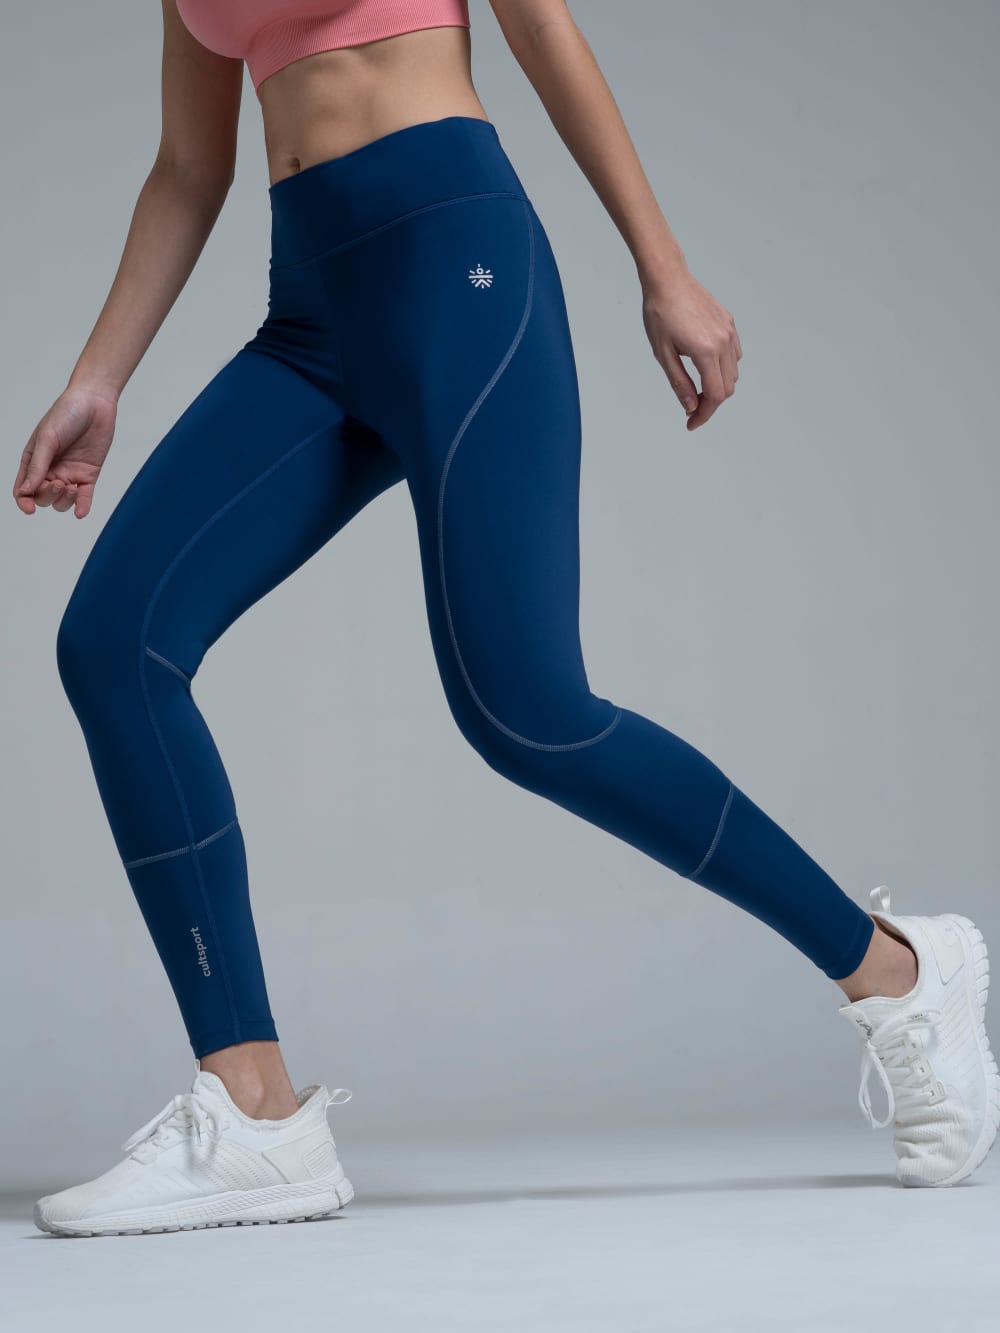 Buy AbsoluteFit Solid Performance Tights for Women Online